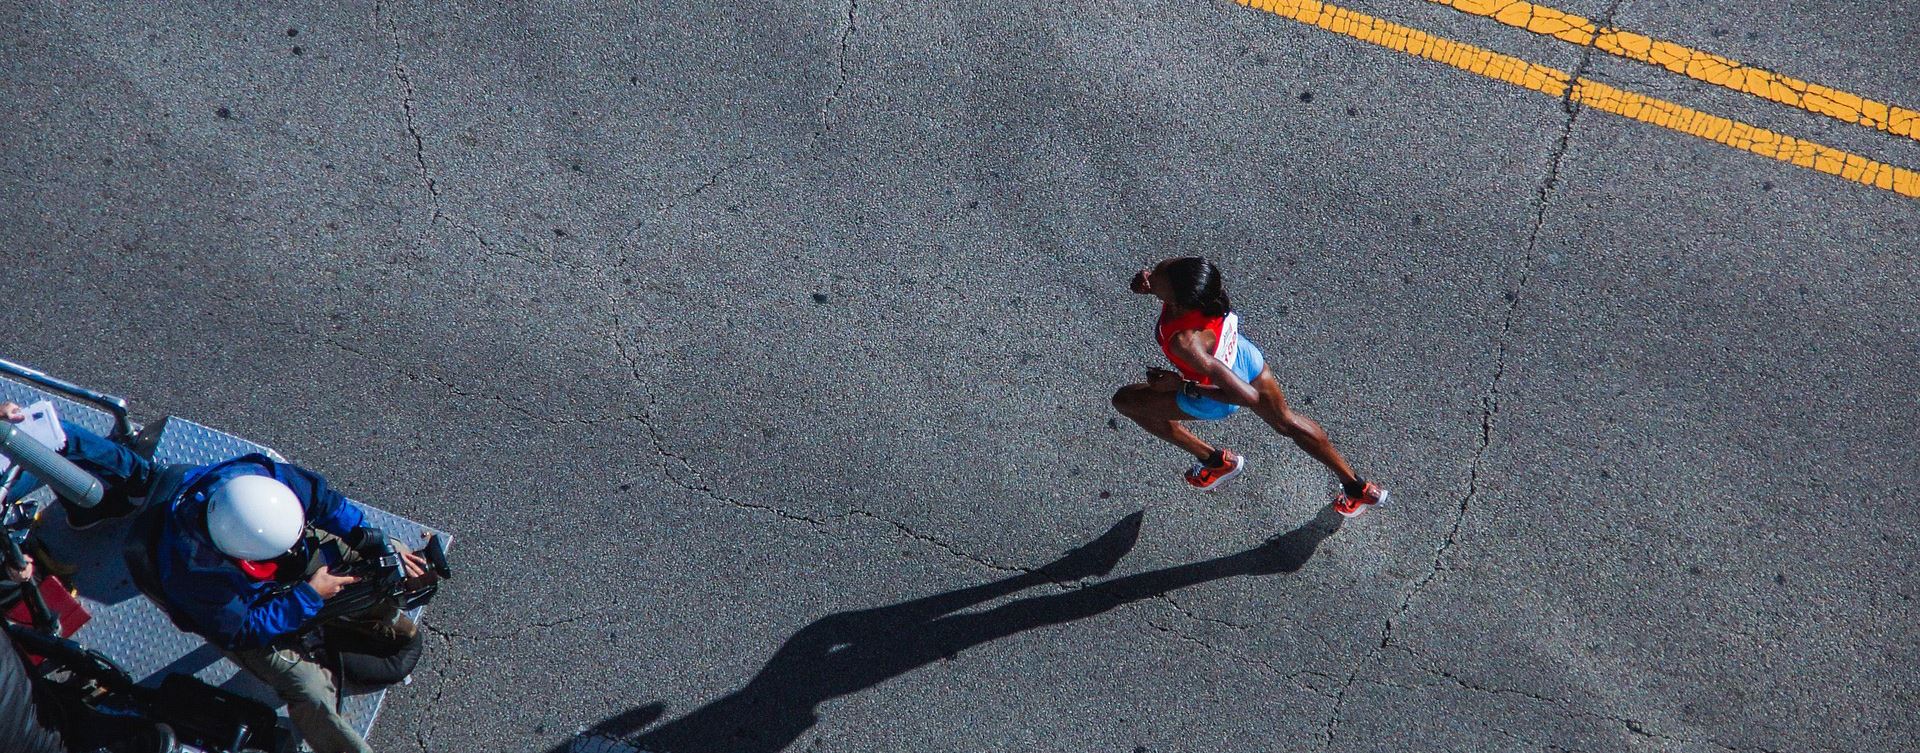 An aerial photo of a runner on a road